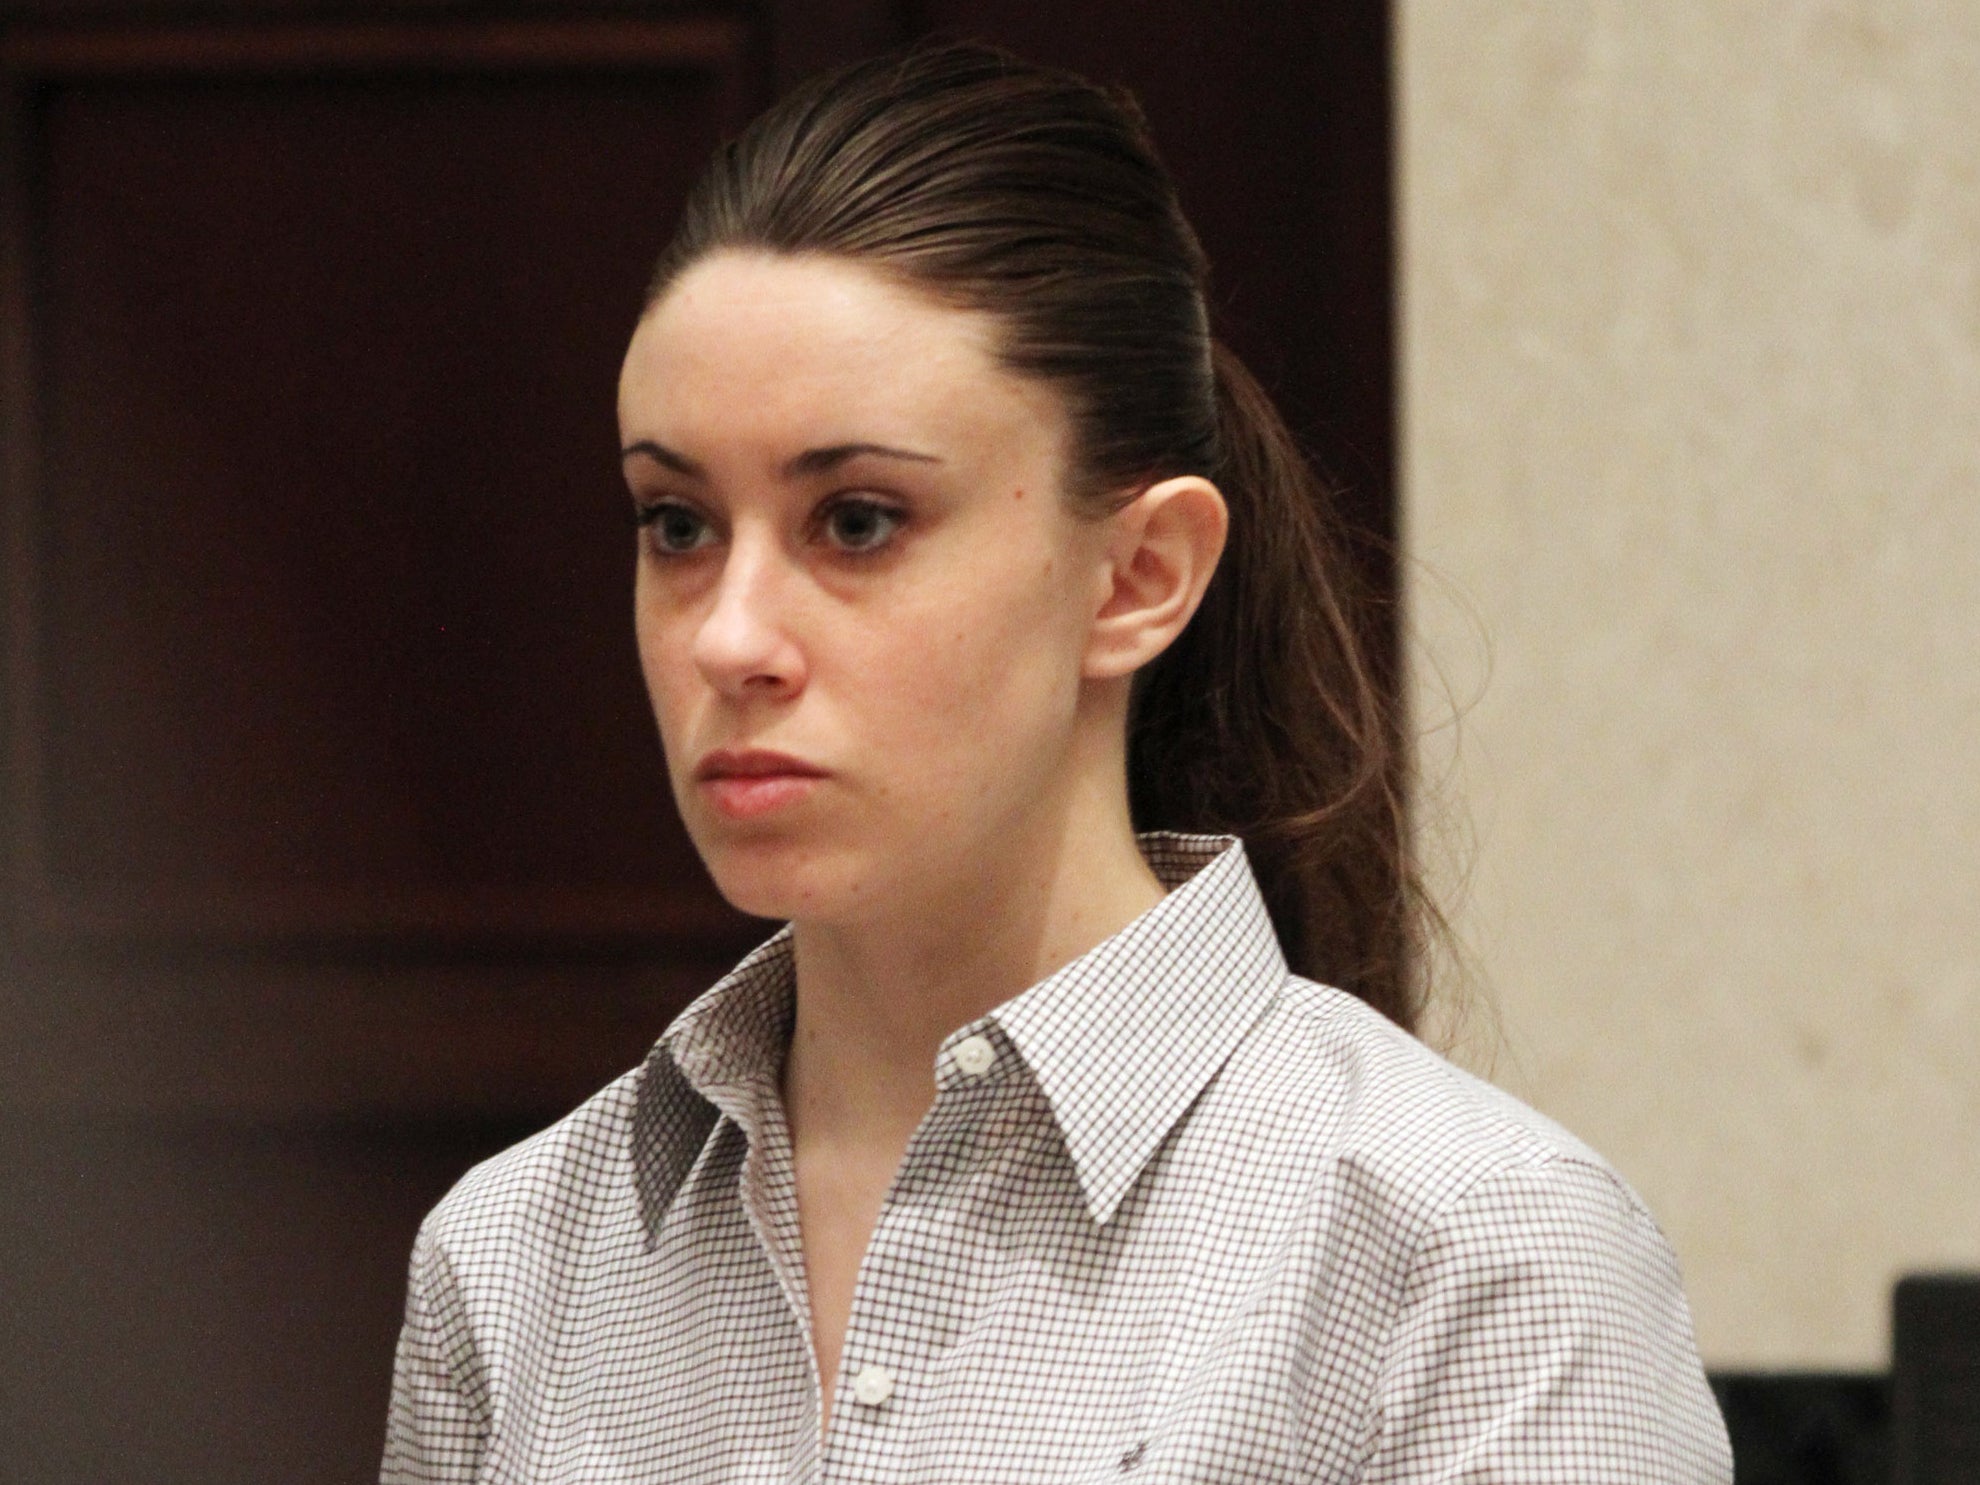 Casey Anthony at the Orange County Courthouse on 30 June 2011 in Orlando, Florida